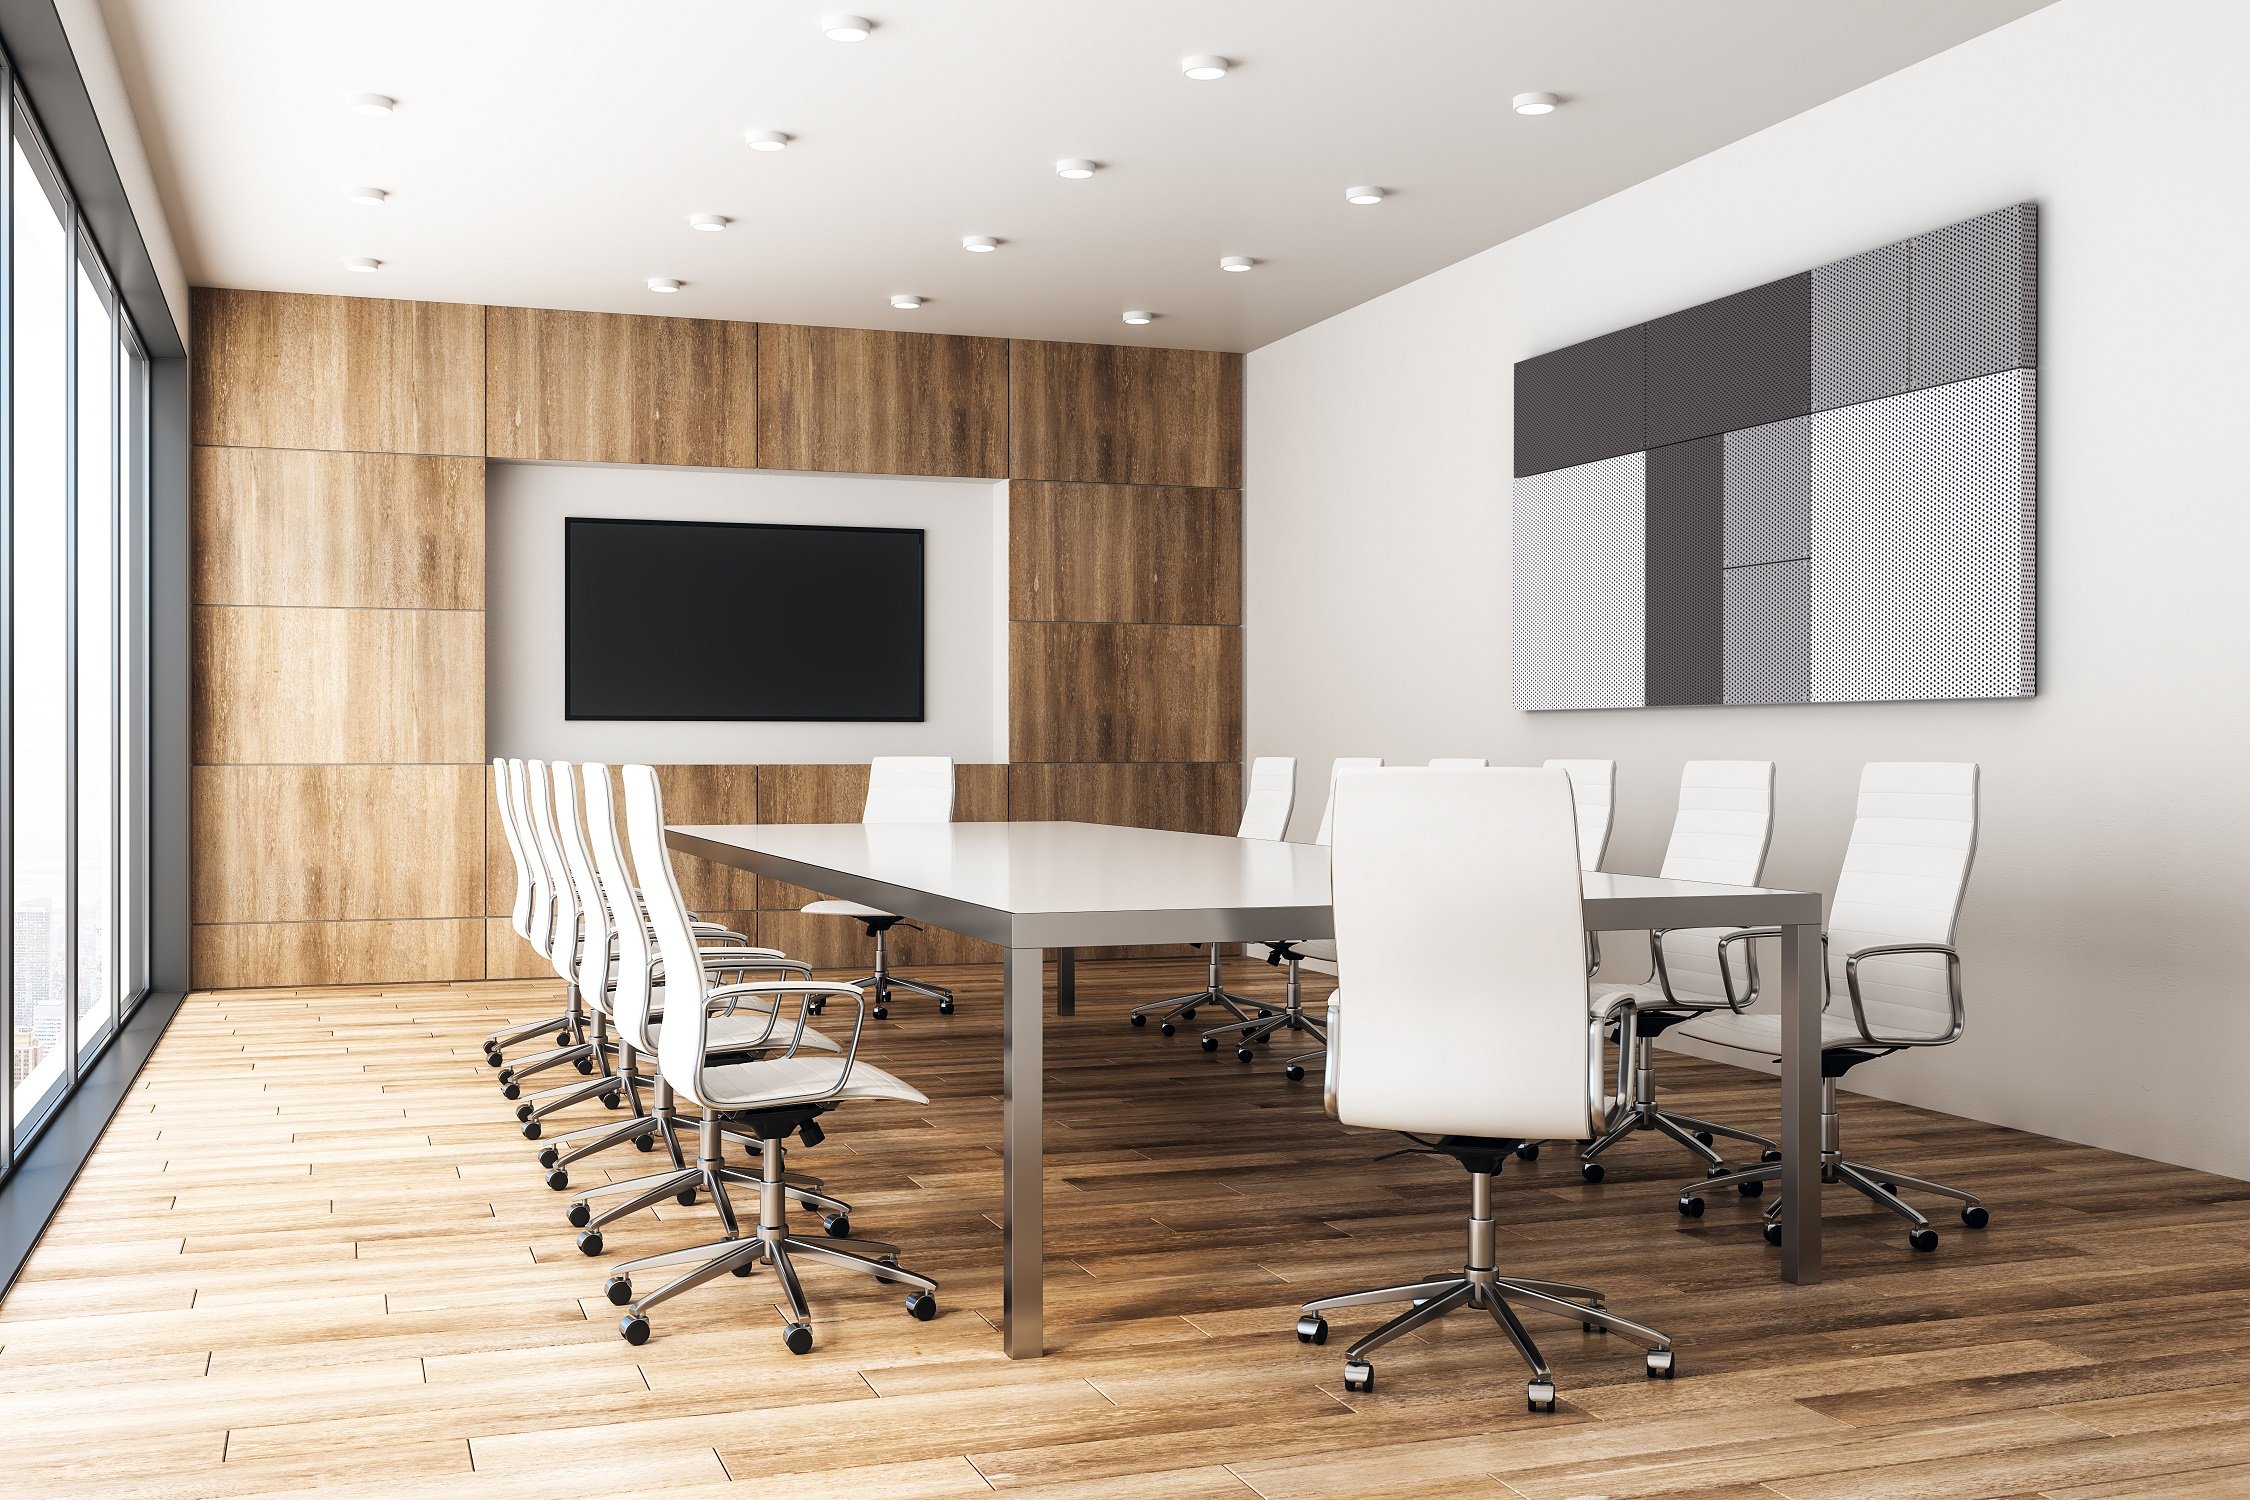 Modern boardroom with acoustic panels installed on wall